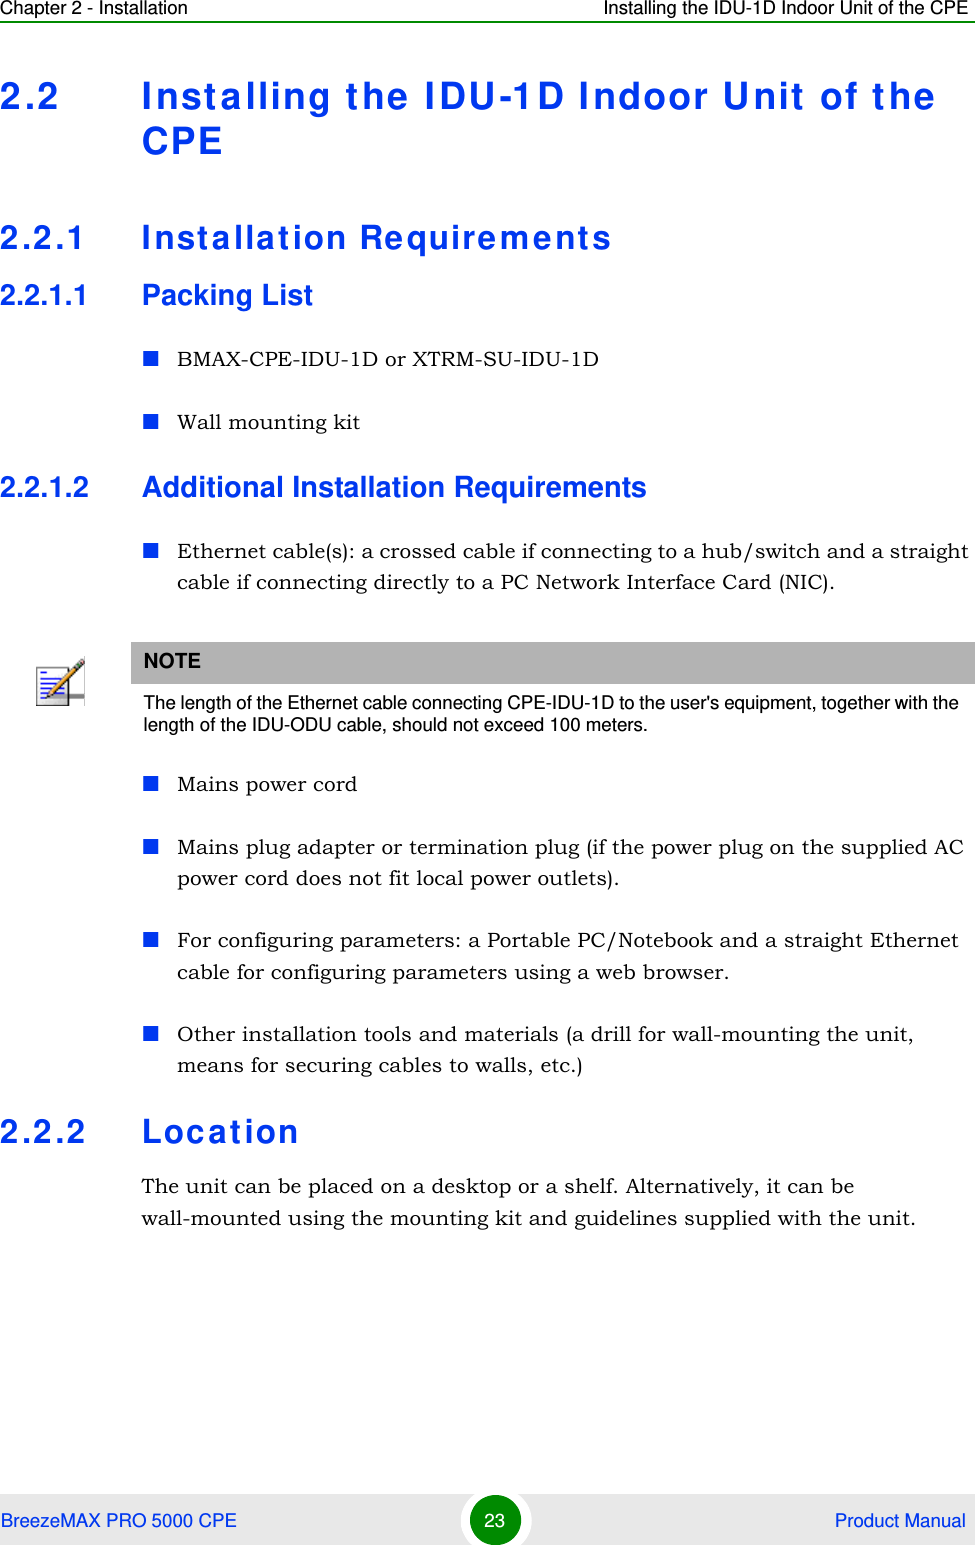 Chapter 2 - Installation Installing the IDU-1D Indoor Unit of the CPEBreezeMAX PRO 5000 CPE 23  Product Manual2.2 Installing the IDU-1D I ndoor Unit of the CPE2.2.1 Insta llation Require ment s2.2.1.1 Packing ListBMAX-CPE-IDU-1D or XTRM-SU-IDU-1DWall mounting kit 2.2.1.2 Additional Installation RequirementsEthernet cable(s): a crossed cable if connecting to a hub/switch and a straight cable if connecting directly to a PC Network Interface Card (NIC).Mains power cordMains plug adapter or termination plug (if the power plug on the supplied AC power cord does not fit local power outlets).For configuring parameters: a Portable PC/Notebook and a straight Ethernet cable for configuring parameters using a web browser.Other installation tools and materials (a drill for wall-mounting the unit, means for securing cables to walls, etc.)2.2.2 LocationThe unit can be placed on a desktop or a shelf. Alternatively, it can be wall-mounted using the mounting kit and guidelines supplied with the unit.NOTEThe length of the Ethernet cable connecting CPE-IDU-1D to the user&apos;s equipment, together with the length of the IDU-ODU cable, should not exceed 100 meters.